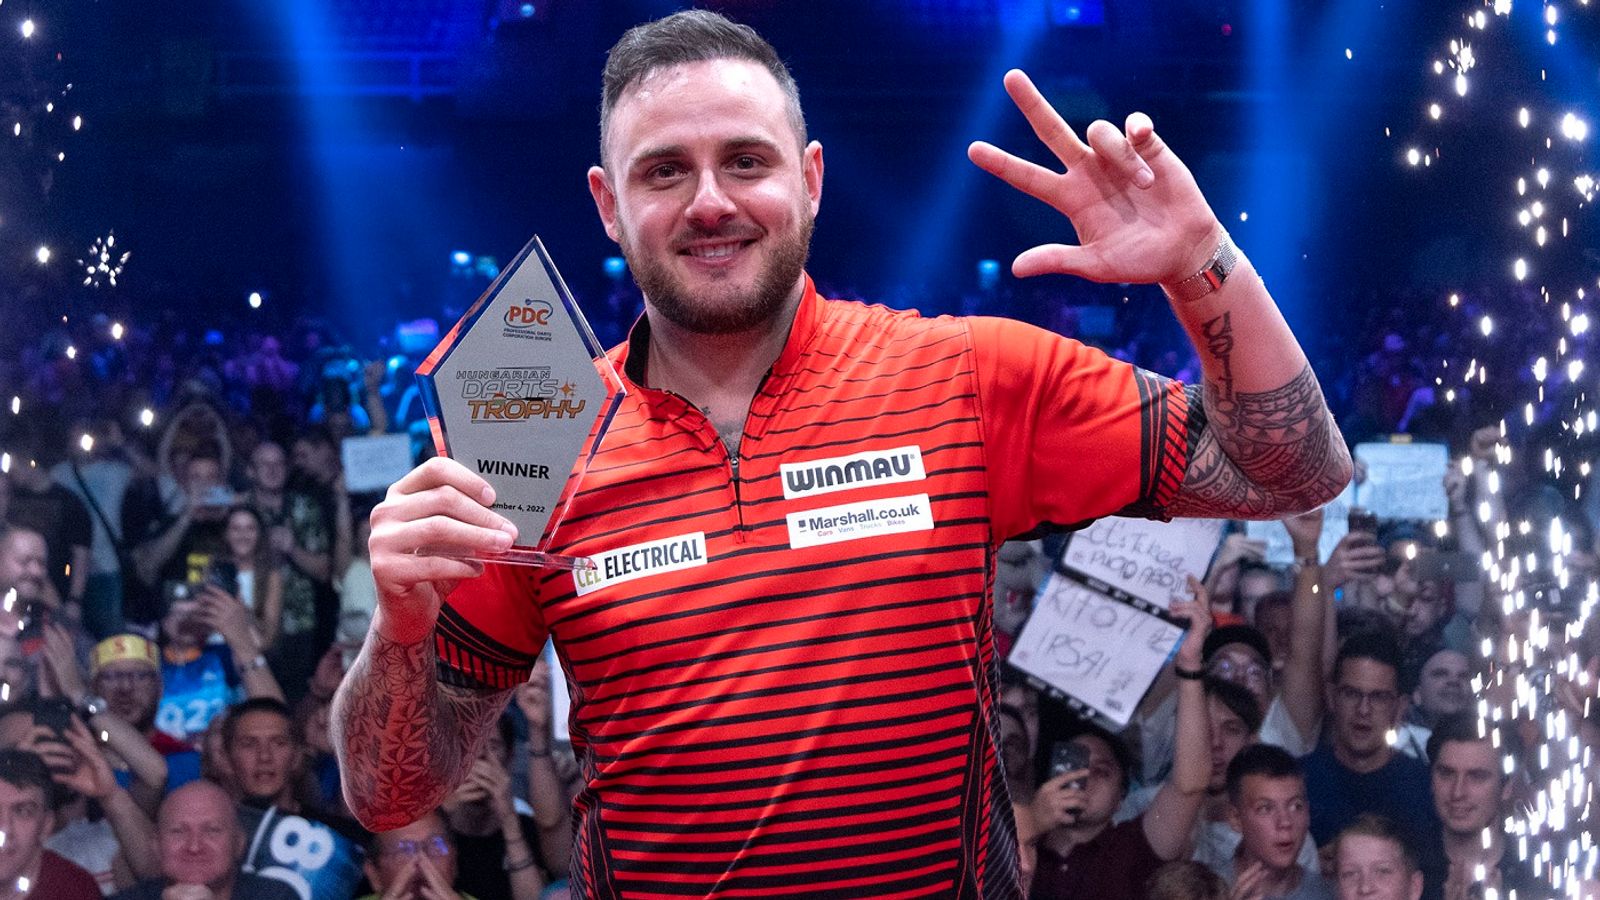 PDC European Tour: Joe Cullen wins Hungarian Darts Trophy after beating William O’Connor in the final